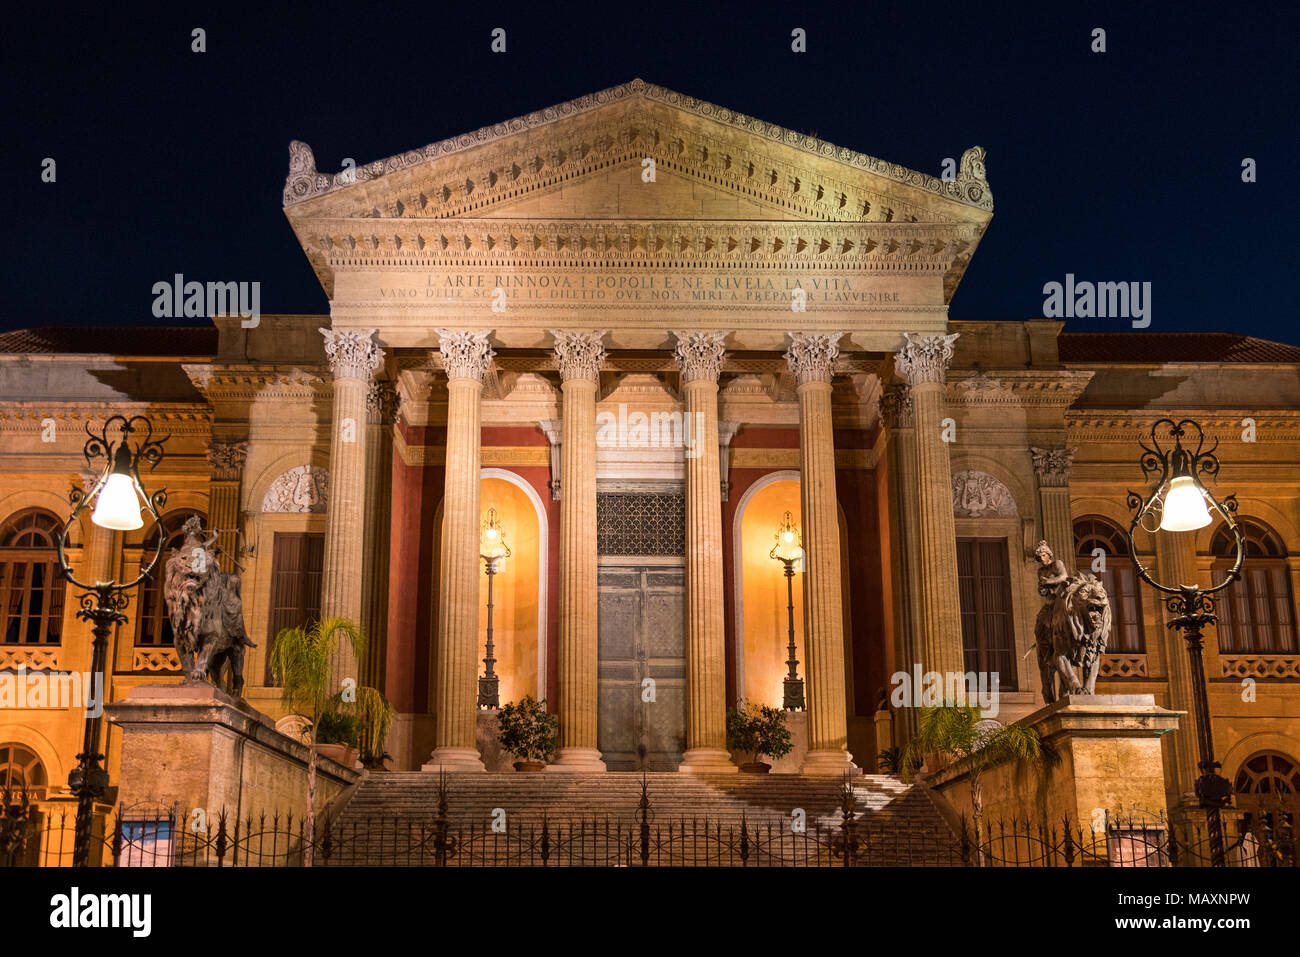 The Teatro Massimo Opera house in Piazza Verdi, Palermo, Sicily taken at night. One of the filming locations for a scene in the Godfather film. Stock Photo